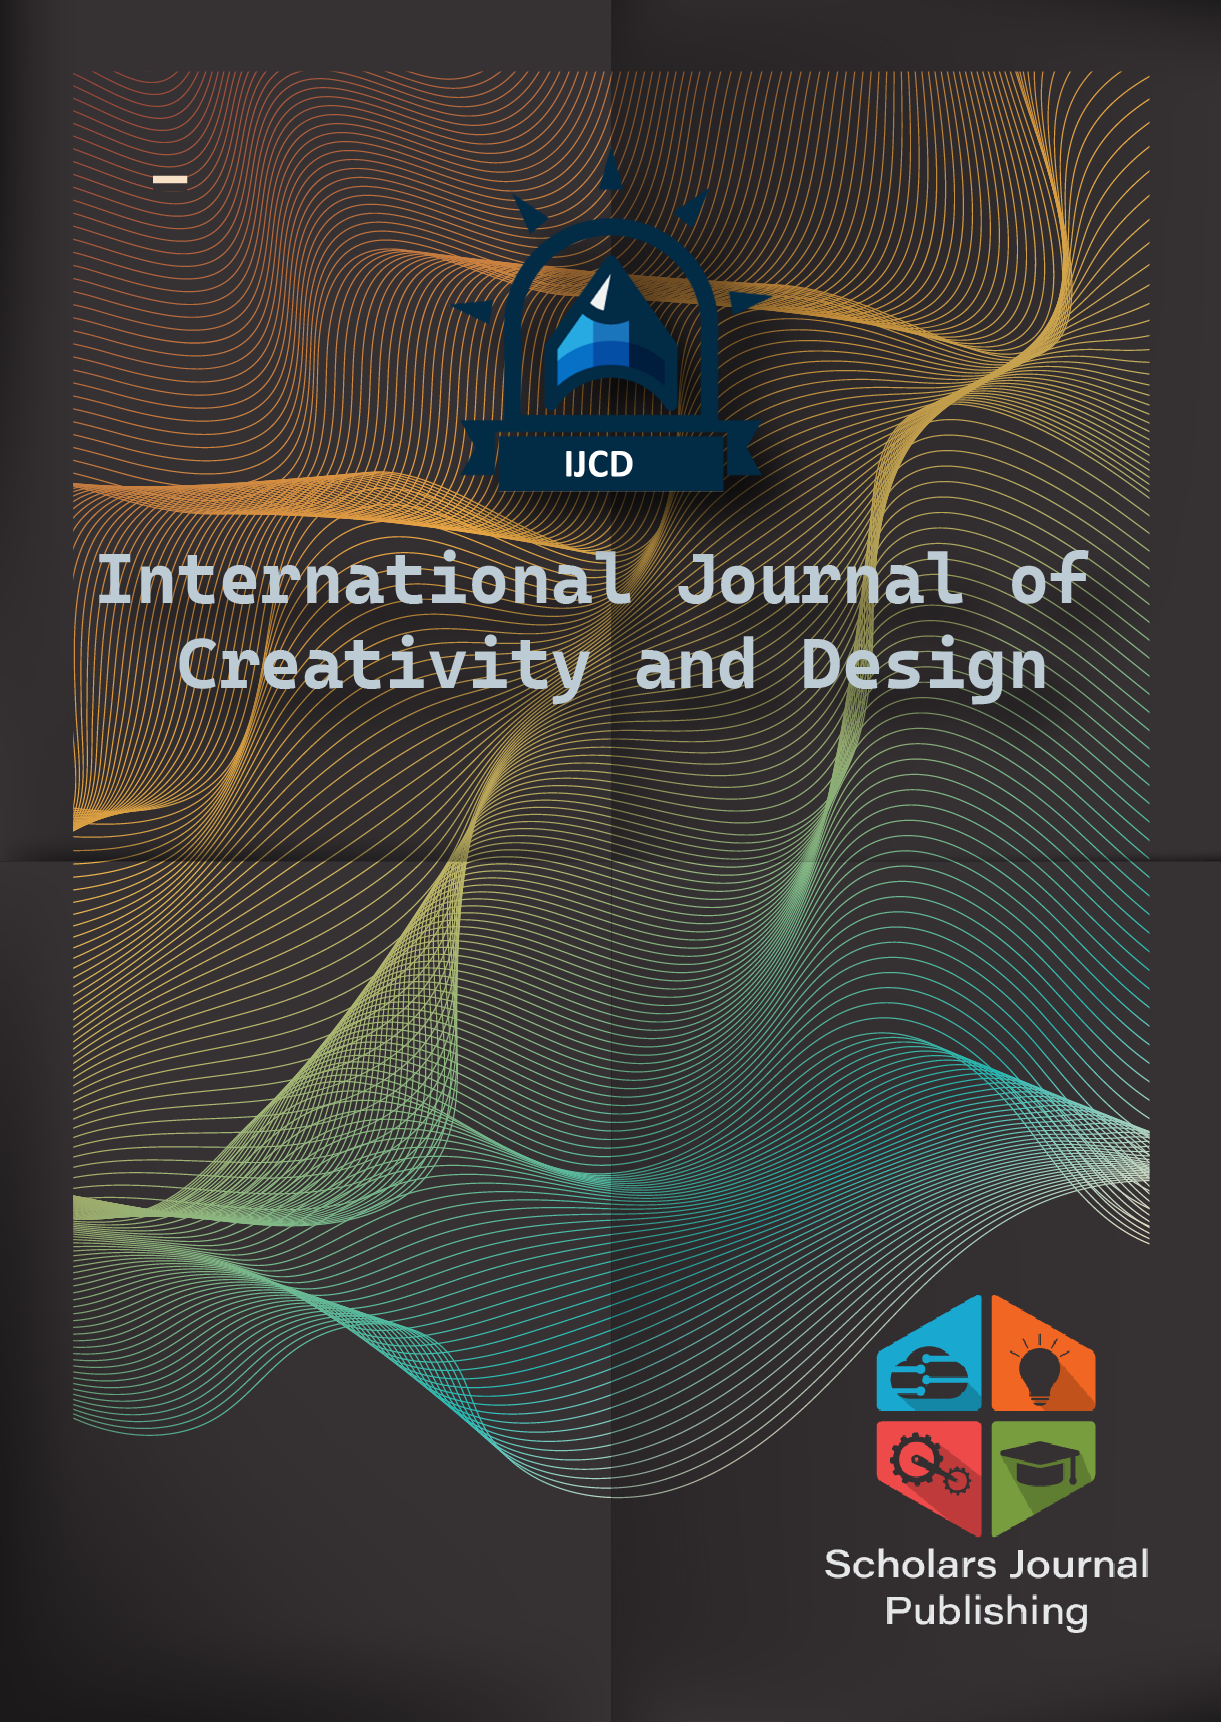 INTERNATIONAL JOURNAL OF CREATIVITY AND DESIGN COVER